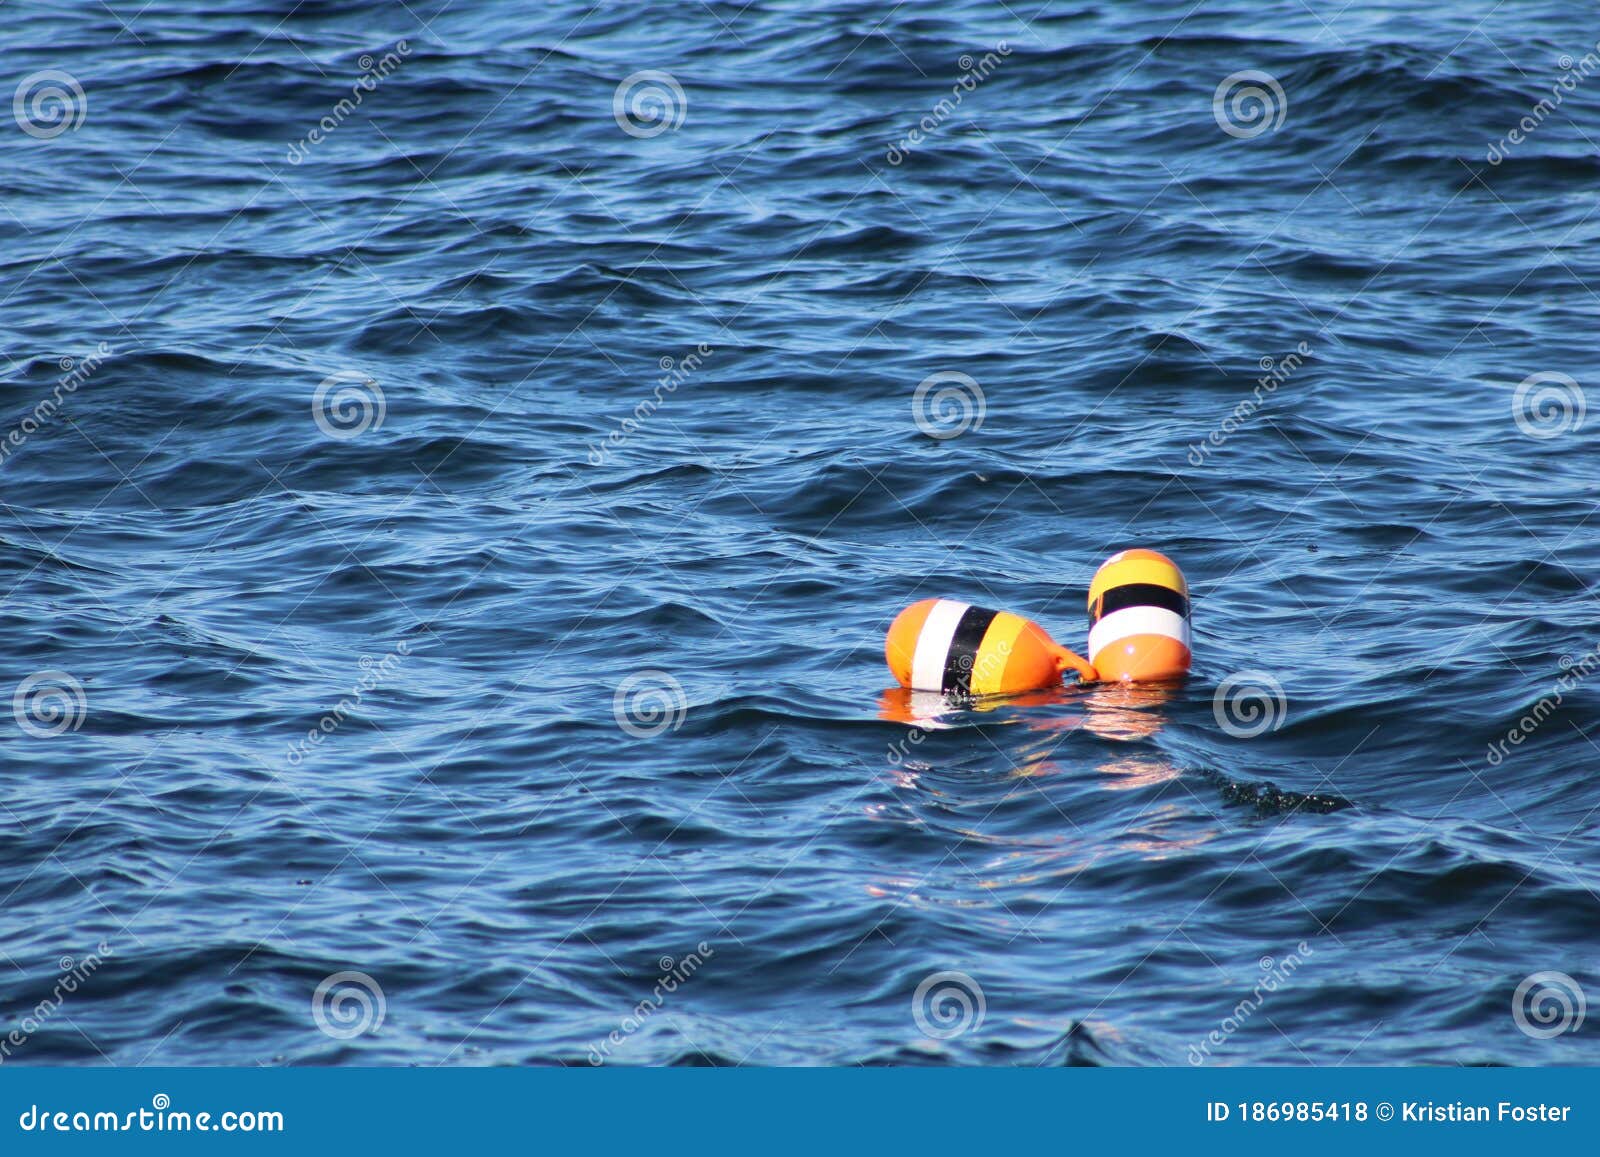 Buoy in Water stock photo. Image of wood, outdoors, winter - 186985418